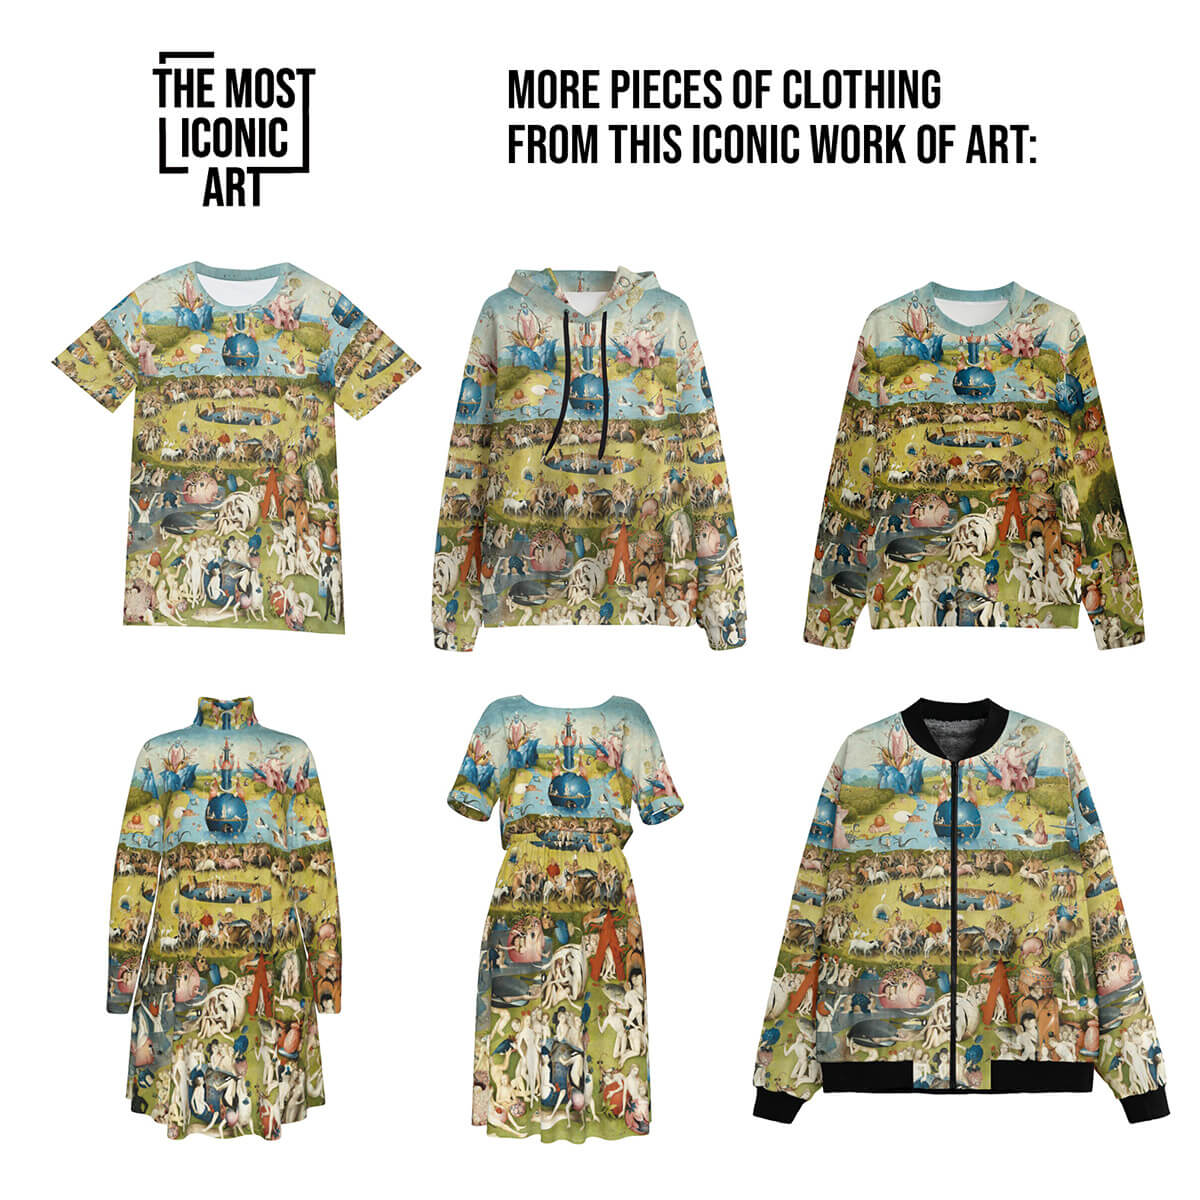 Unique Graphic Shirt Inspired by Renaissance